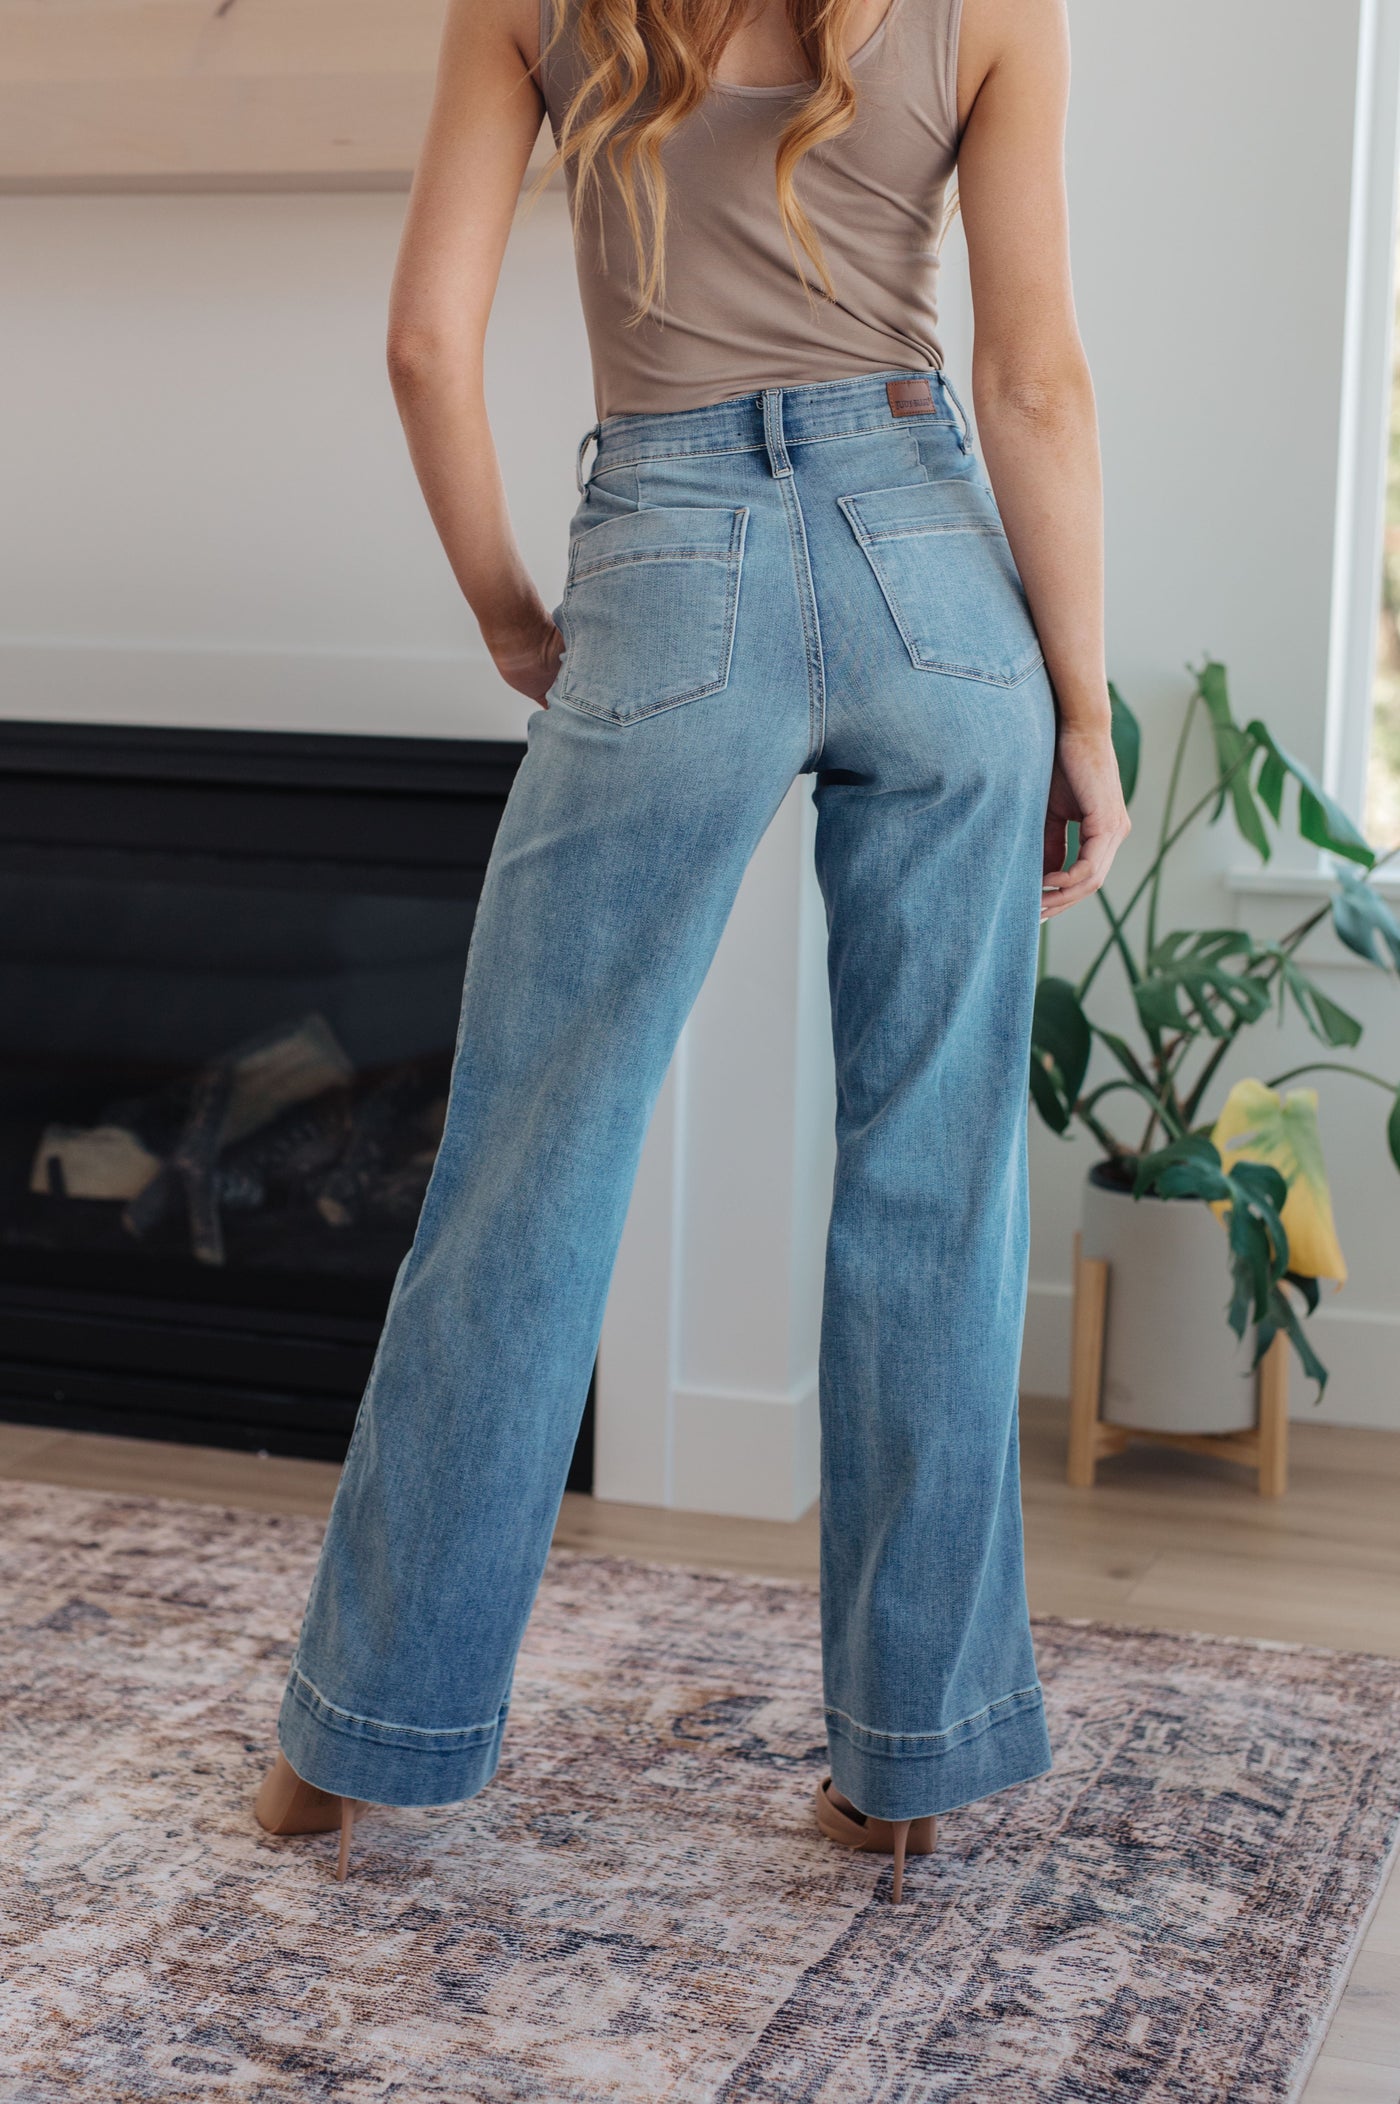 The Mindy Mid Rise Wide Leg Jeans are the perfect closet essential that can be worn year round! Featuring a stretchy light wash denim that shapes a mid rise waist with slanted pockets and zipper fly